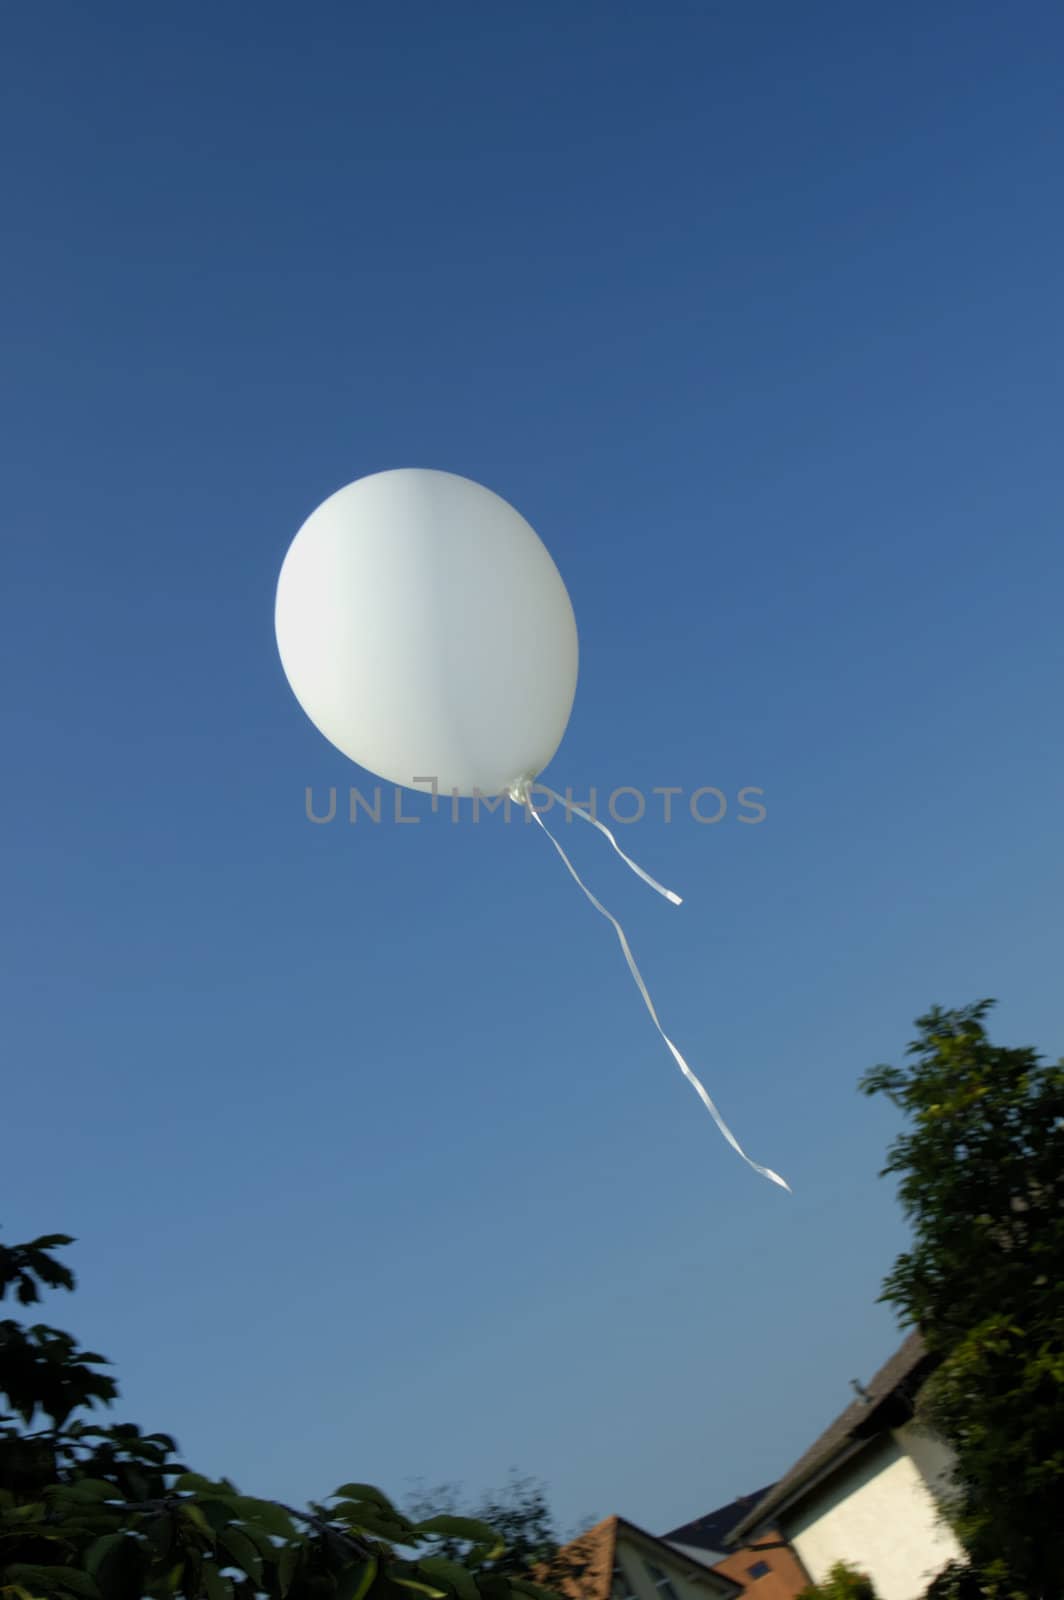 A child's balloon floats away into a clear blue summer sky. Space for text in the sky.